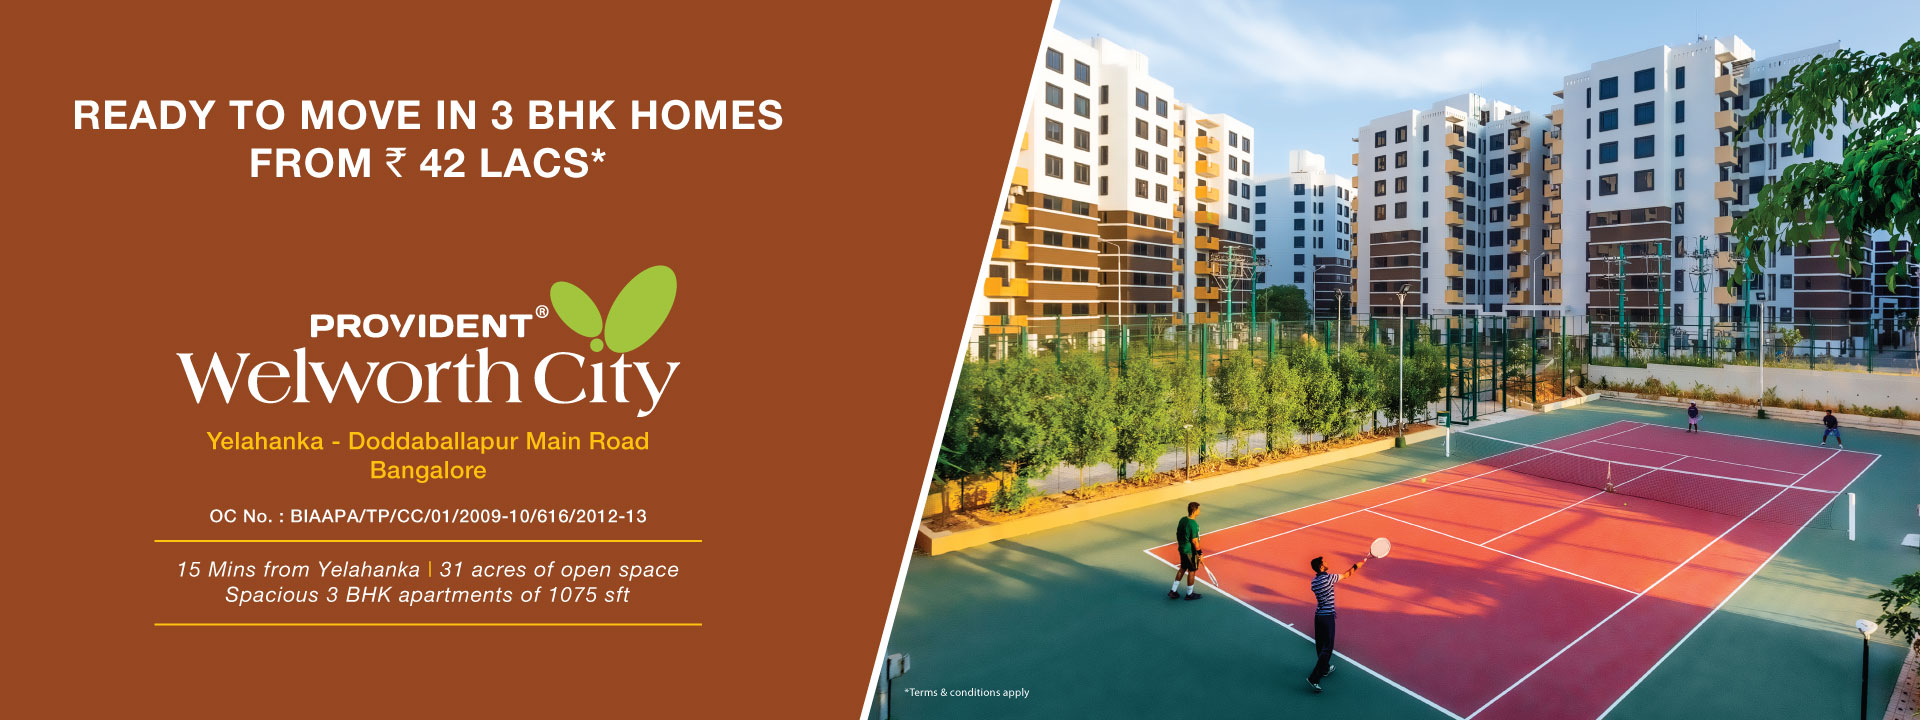 Ready to move in 3 BHK homes from Rs 42 Lacs at Provident Welworth City in Bangalore Update